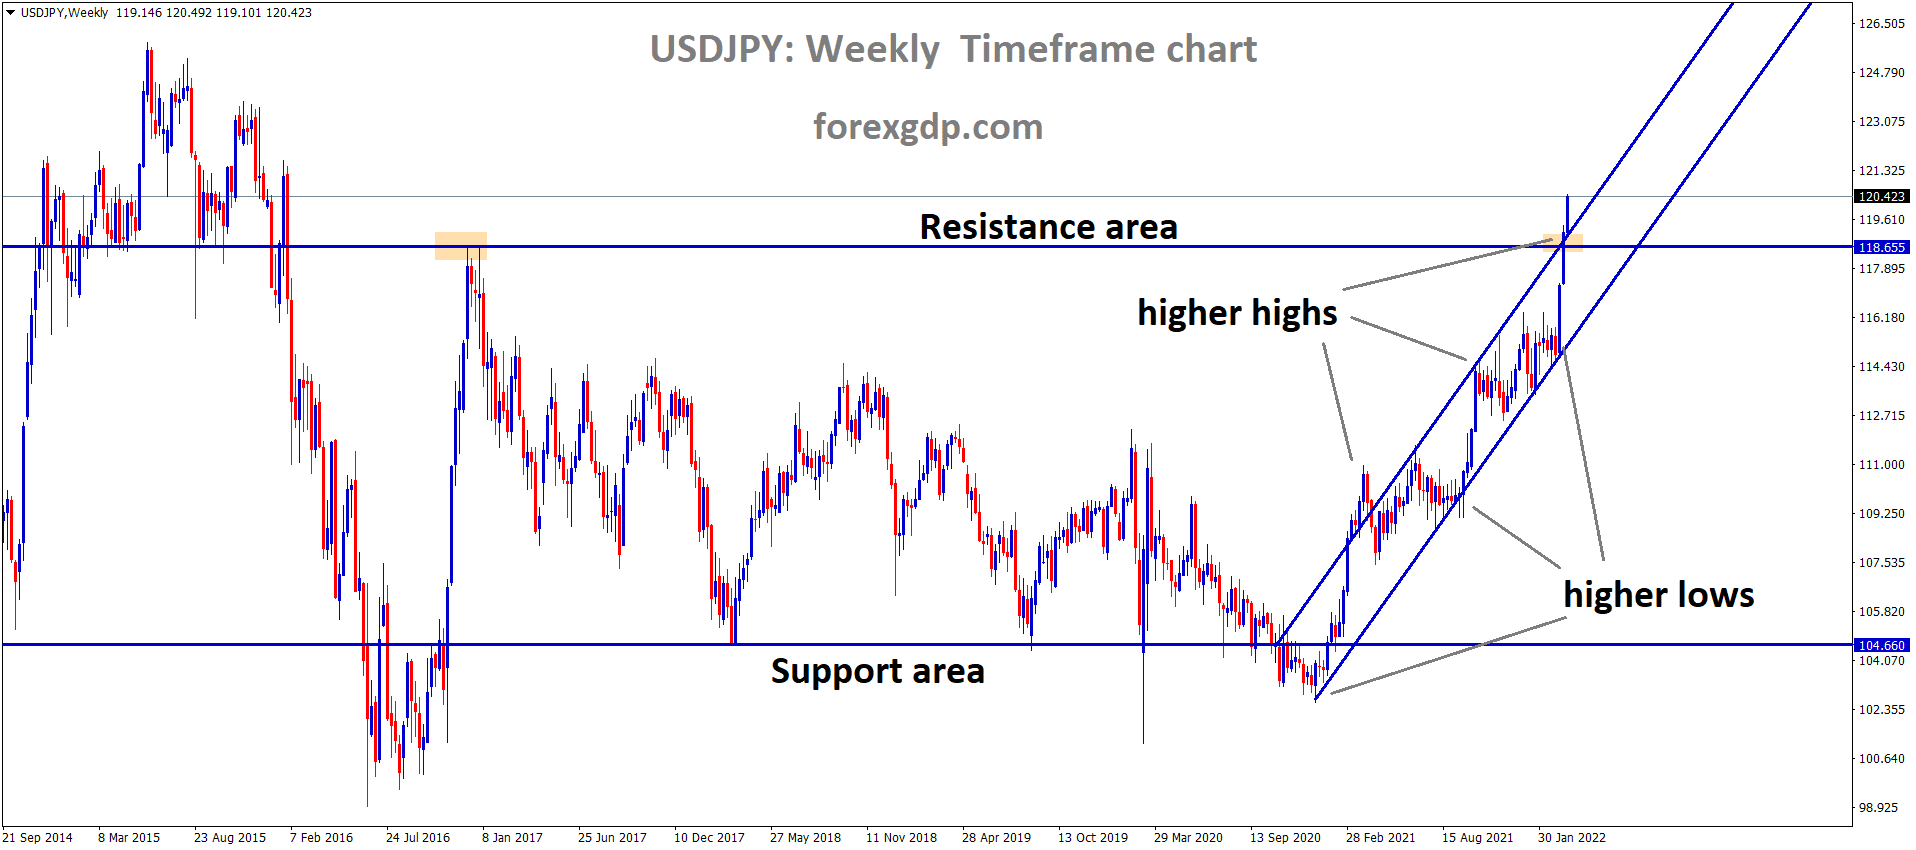 USDJPY W Market has broken the Multi year Resistance area of the Box Pattern and Market has reached the higher high area of the Ascending channel pattern